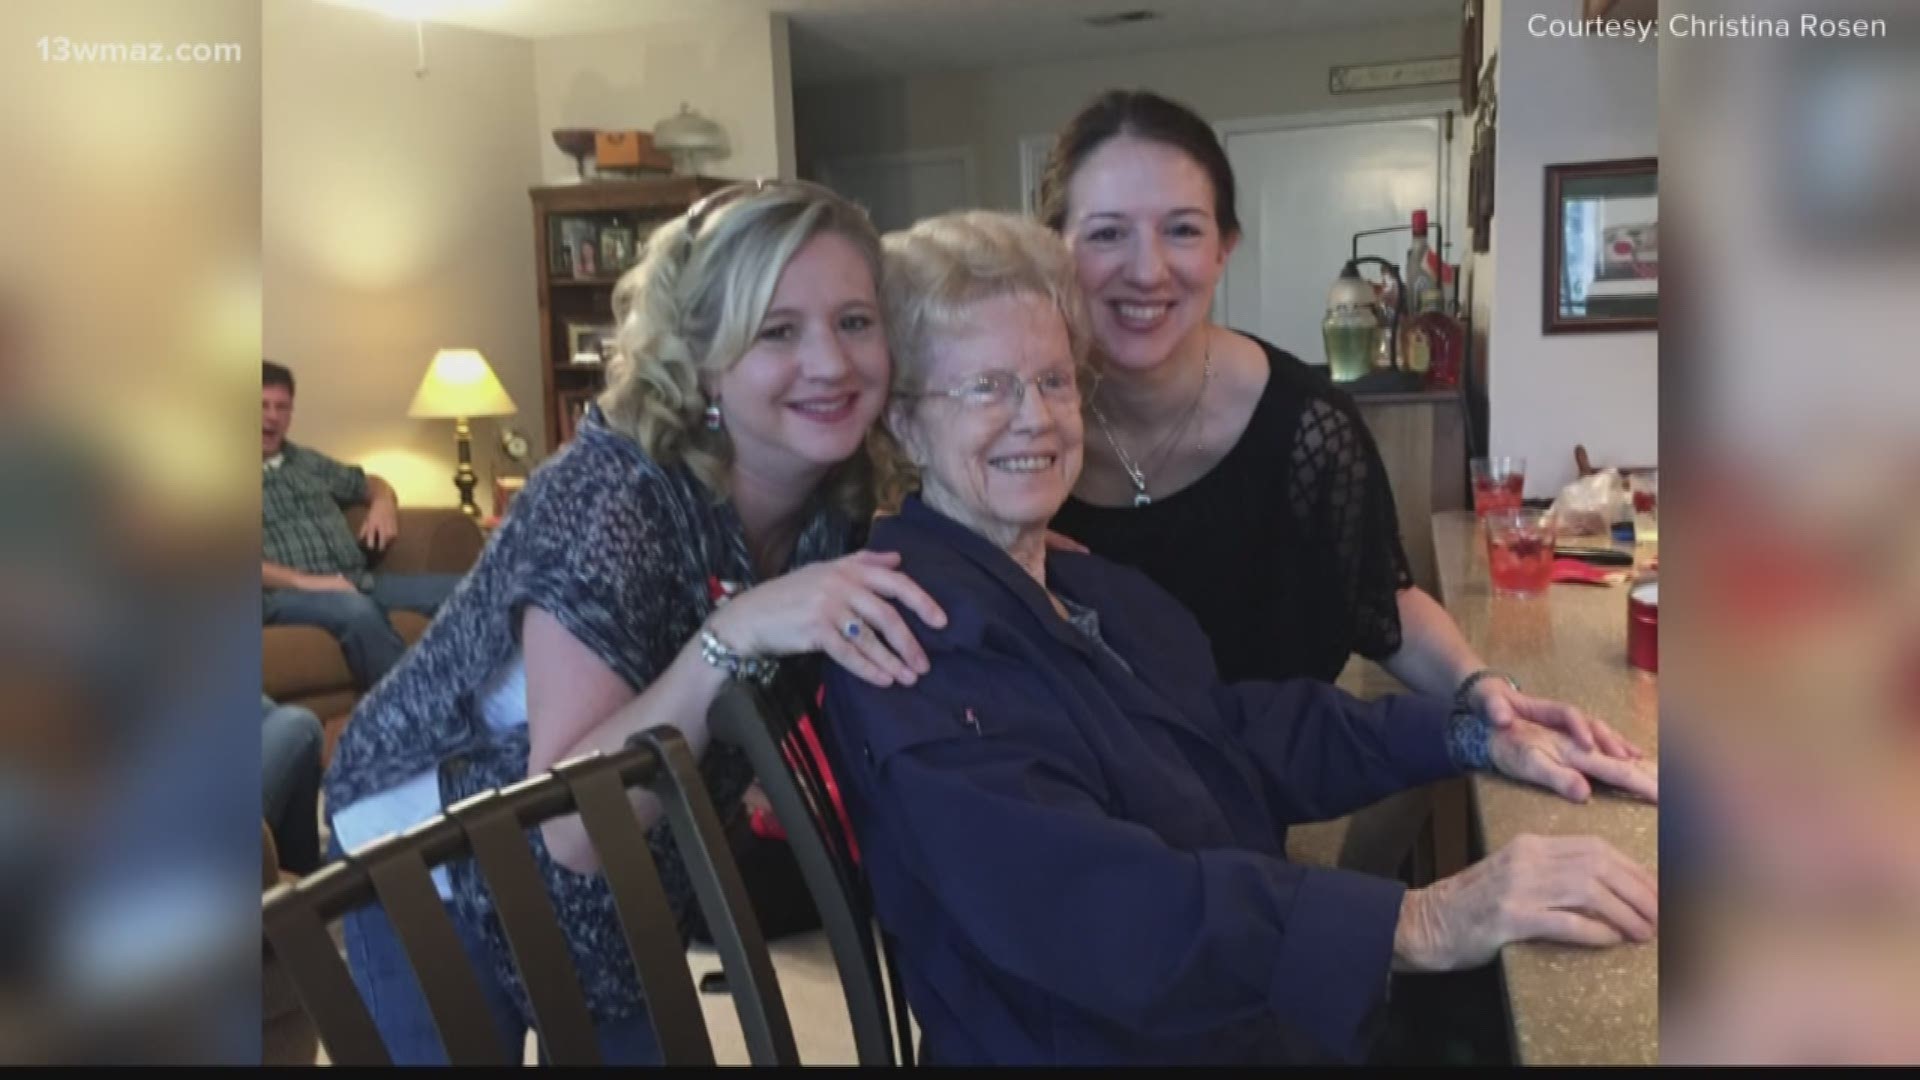 A Central Georgia family is grieving after an elderly woman missing for 2 days was found dead after her car ran into a ditch.